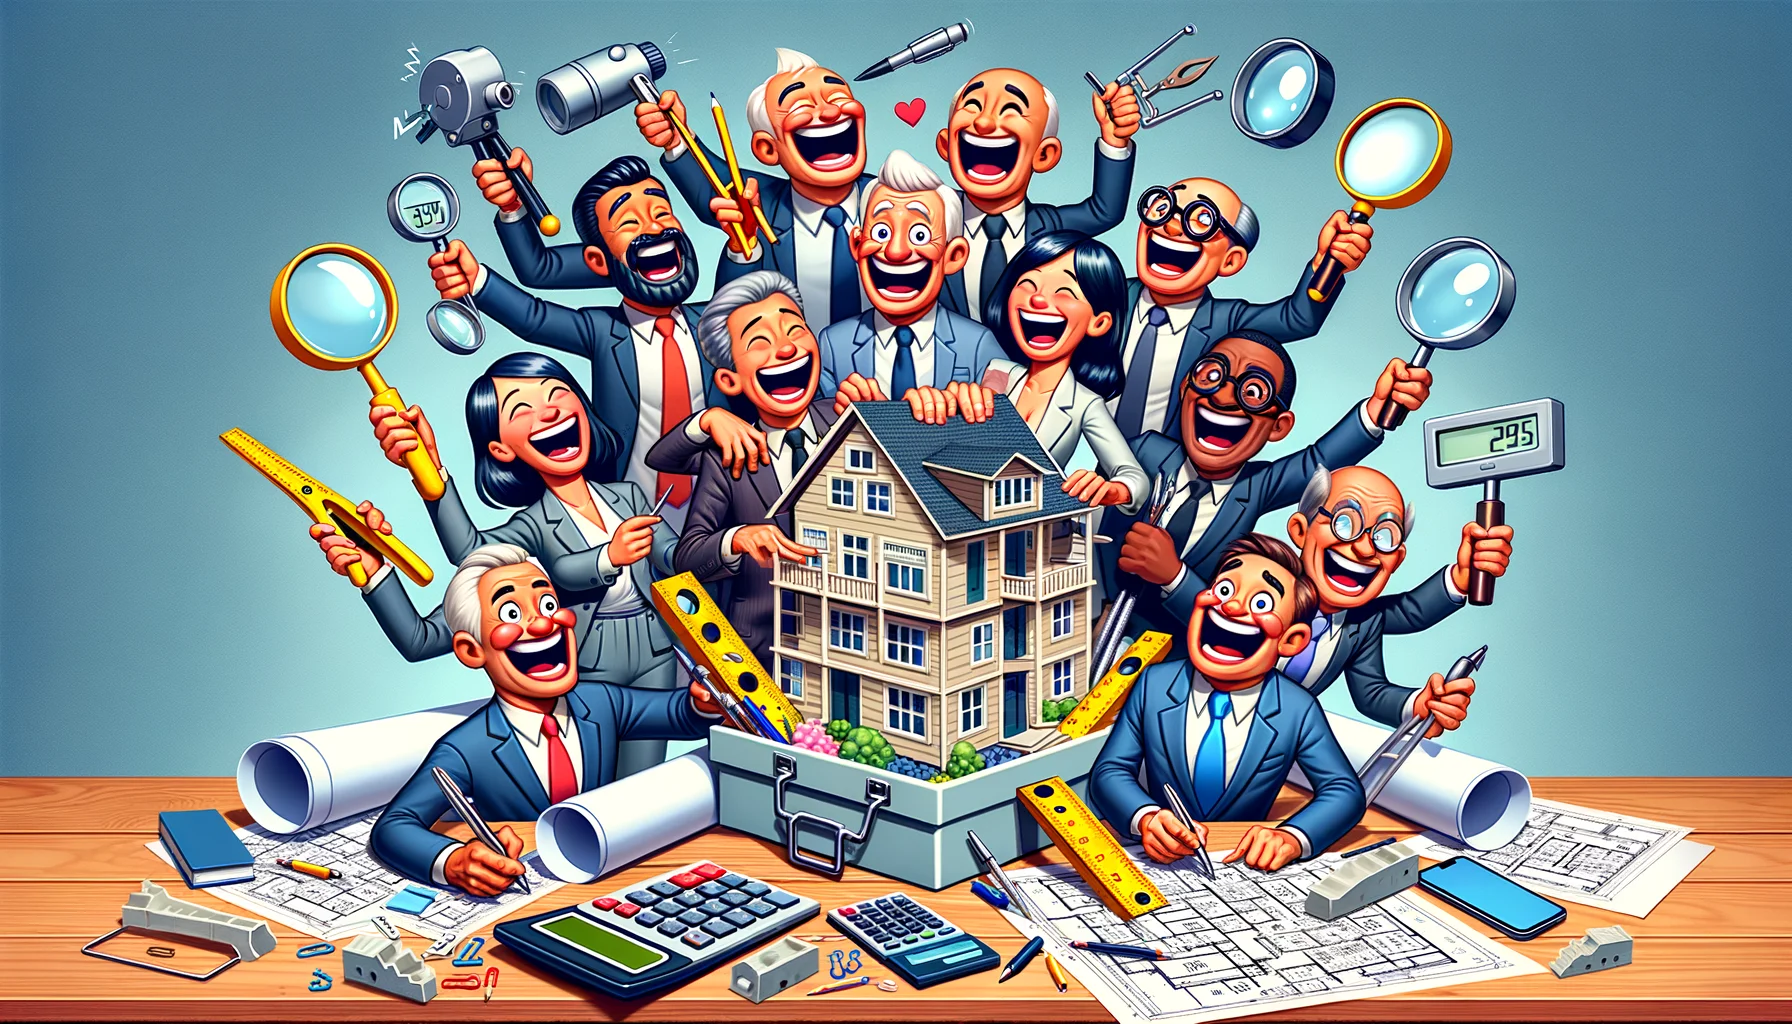 Imagine an amusing and lifelike scene showcasing real estate tools and calculators. In this perfect scenario, real estate agents of diverse descents like Asian, Hispanic and African-American are laughing and having a friendly competition. They're using large oversized calculators, magnifying glasses, and blueprints. These tools morph into fun, cartoon-like figures that are poking their heads out of a toolbox, smiling, and chucking houses and buildings at each other, all while some agents scribble mind-boggling formulas on a nearby whiteboard. There's a sense of enjoyment and light-heartedness in air.